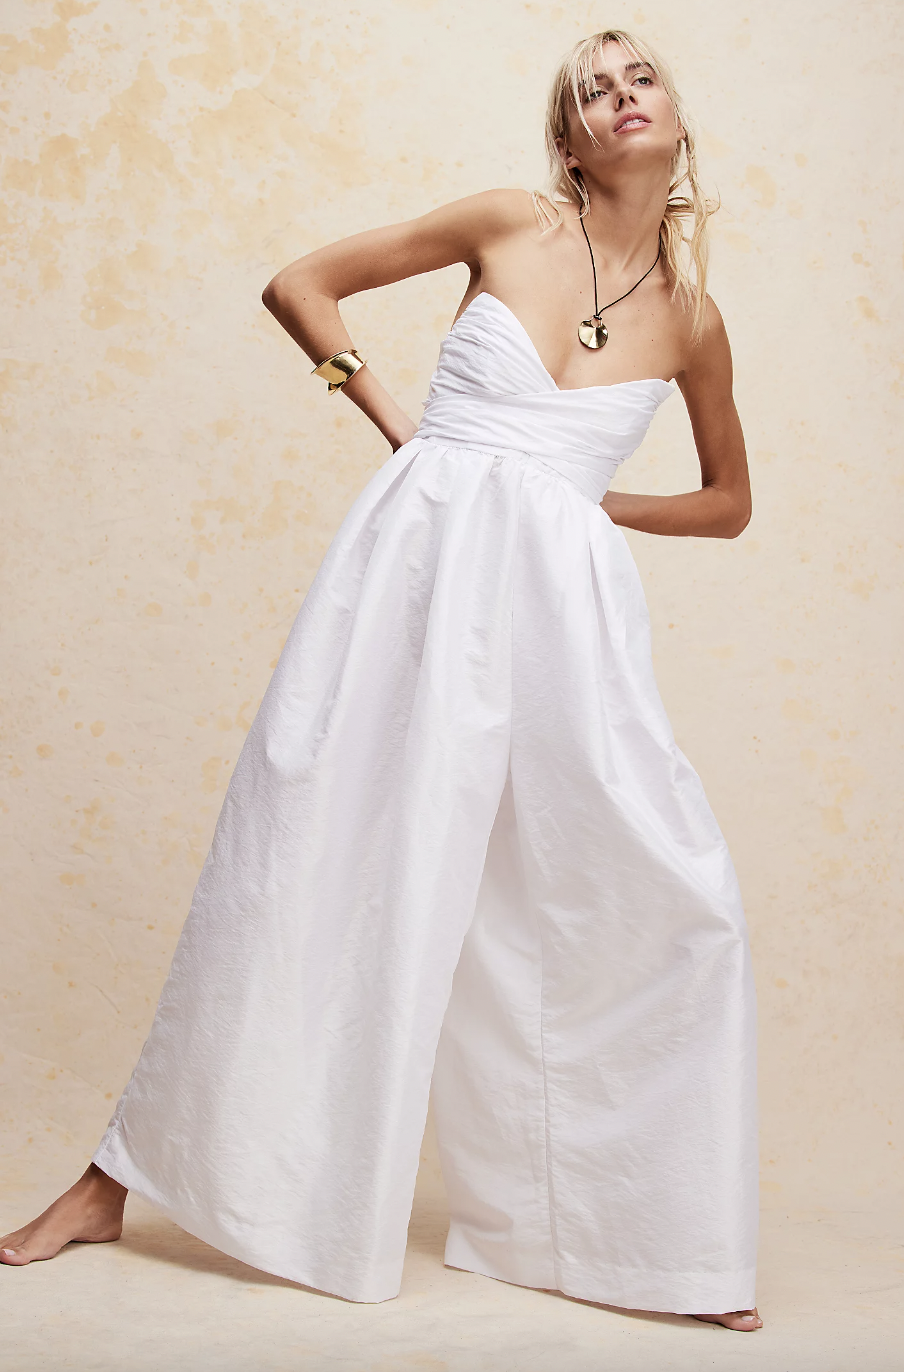 <p><strong>£228.00</strong></p><p><a href="https://www.freepeople.com/uk/shop/jade-jumpsuit2/">Shop Now</a></p><p>Calling all boho brides – we've found the wedding jumpsuit for you. Free People's strapless number features a sweetheart neckline, and a wrap tie-bow detail you can tie at the front or the back. Plus, this baby is a smocked back and suuuper wide-leg pants so is bascially the definition of comfortable. </p>